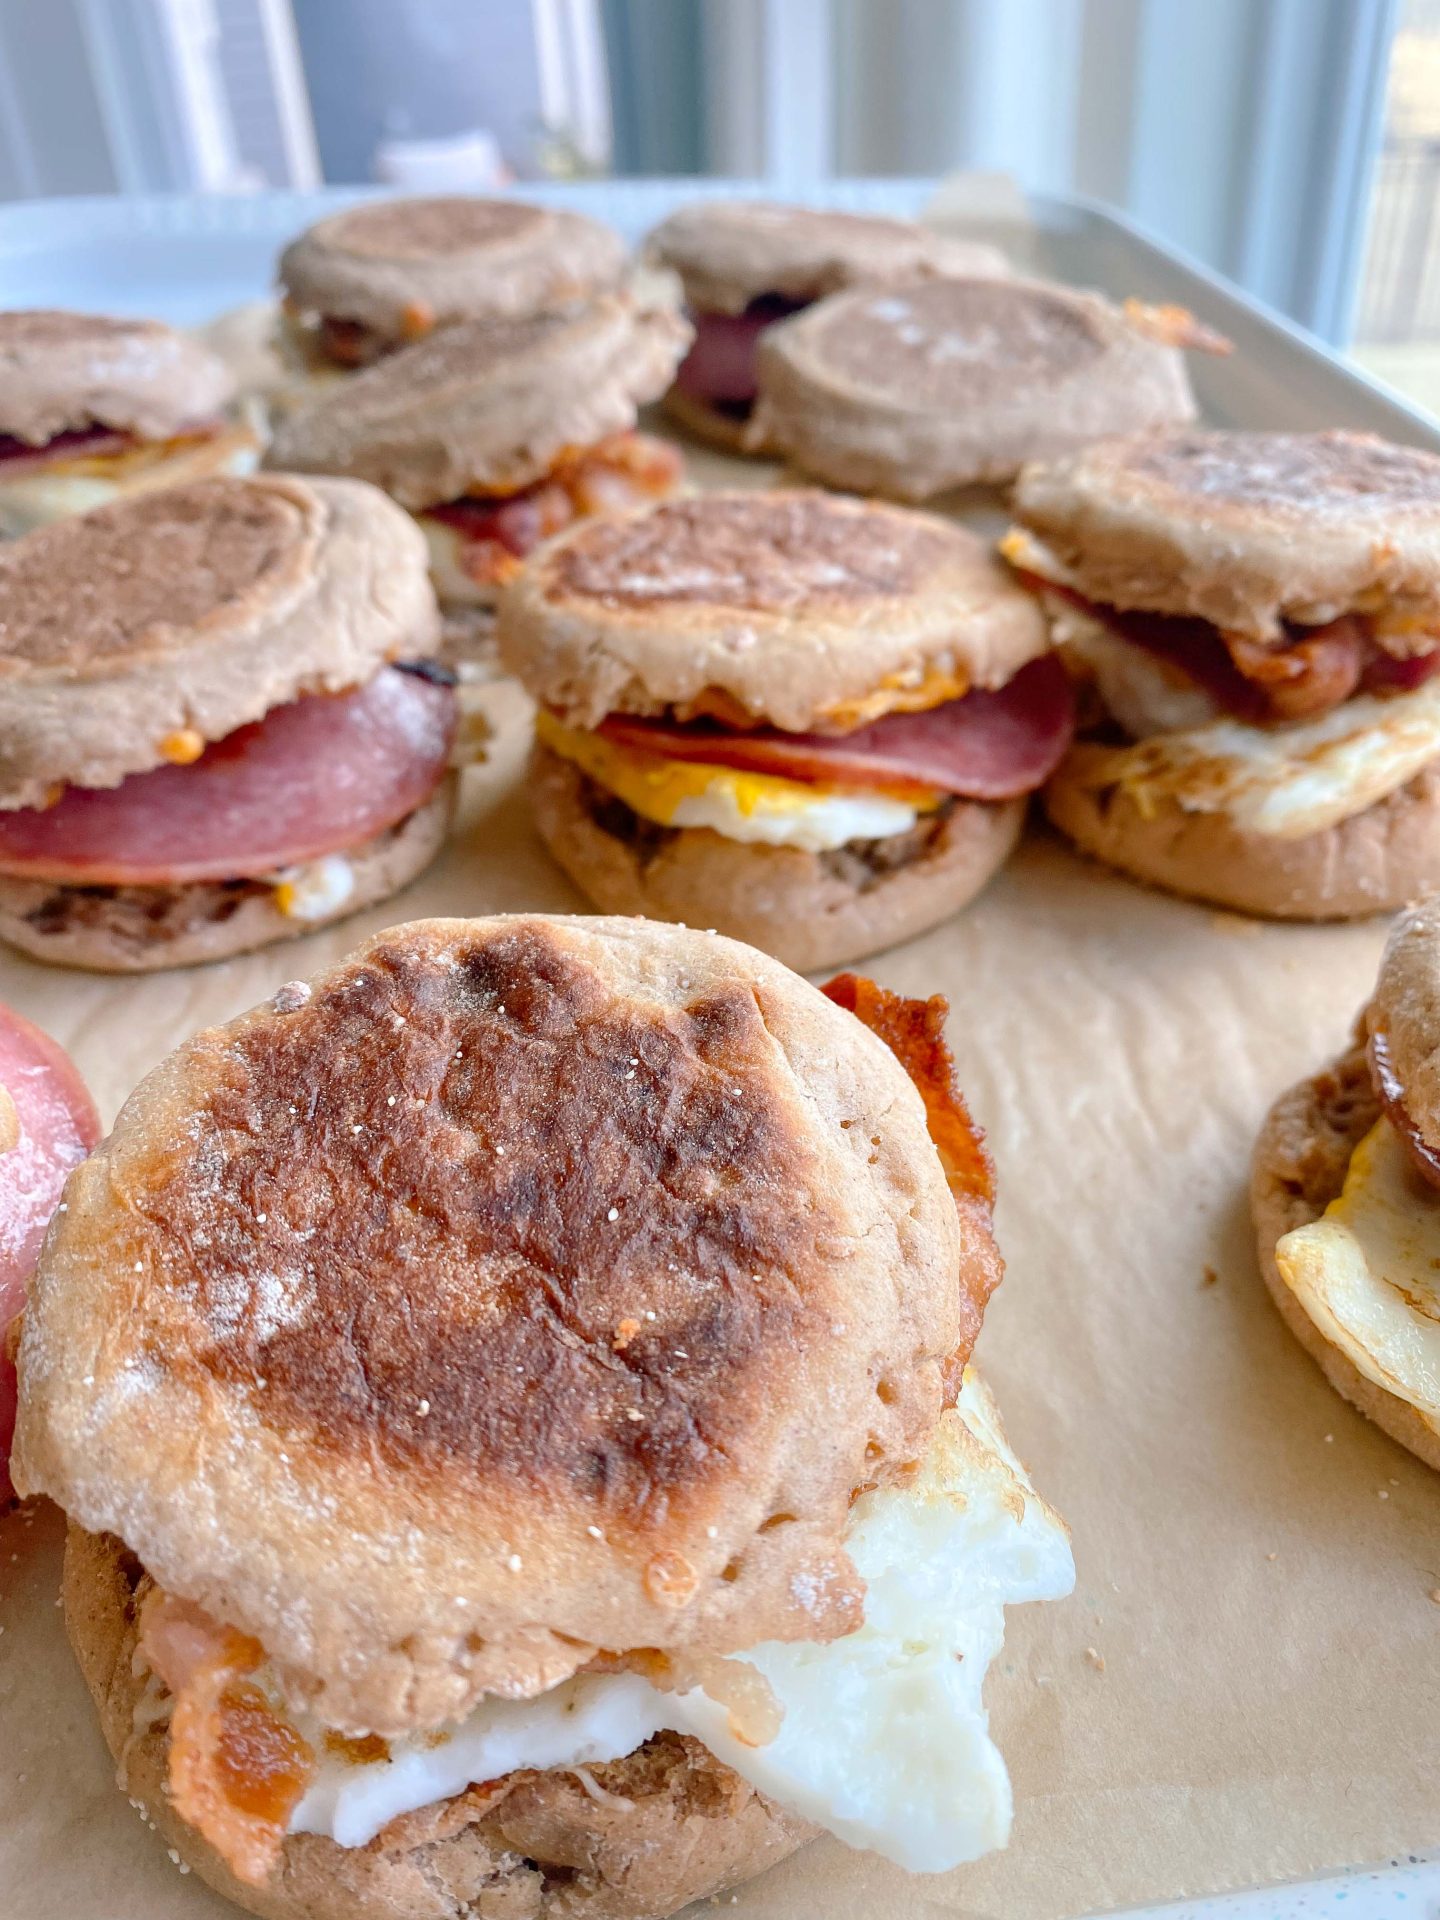 breakfast sandwiches, breakfast sandwich, meal prep, bacon, egg, cheese, easy to make, quick meals, quick breakfast idea, breakfast idea meal prepping, English muffins, over easy eggs, prep on Sunday, healthy meals, healthy recipes, on the go